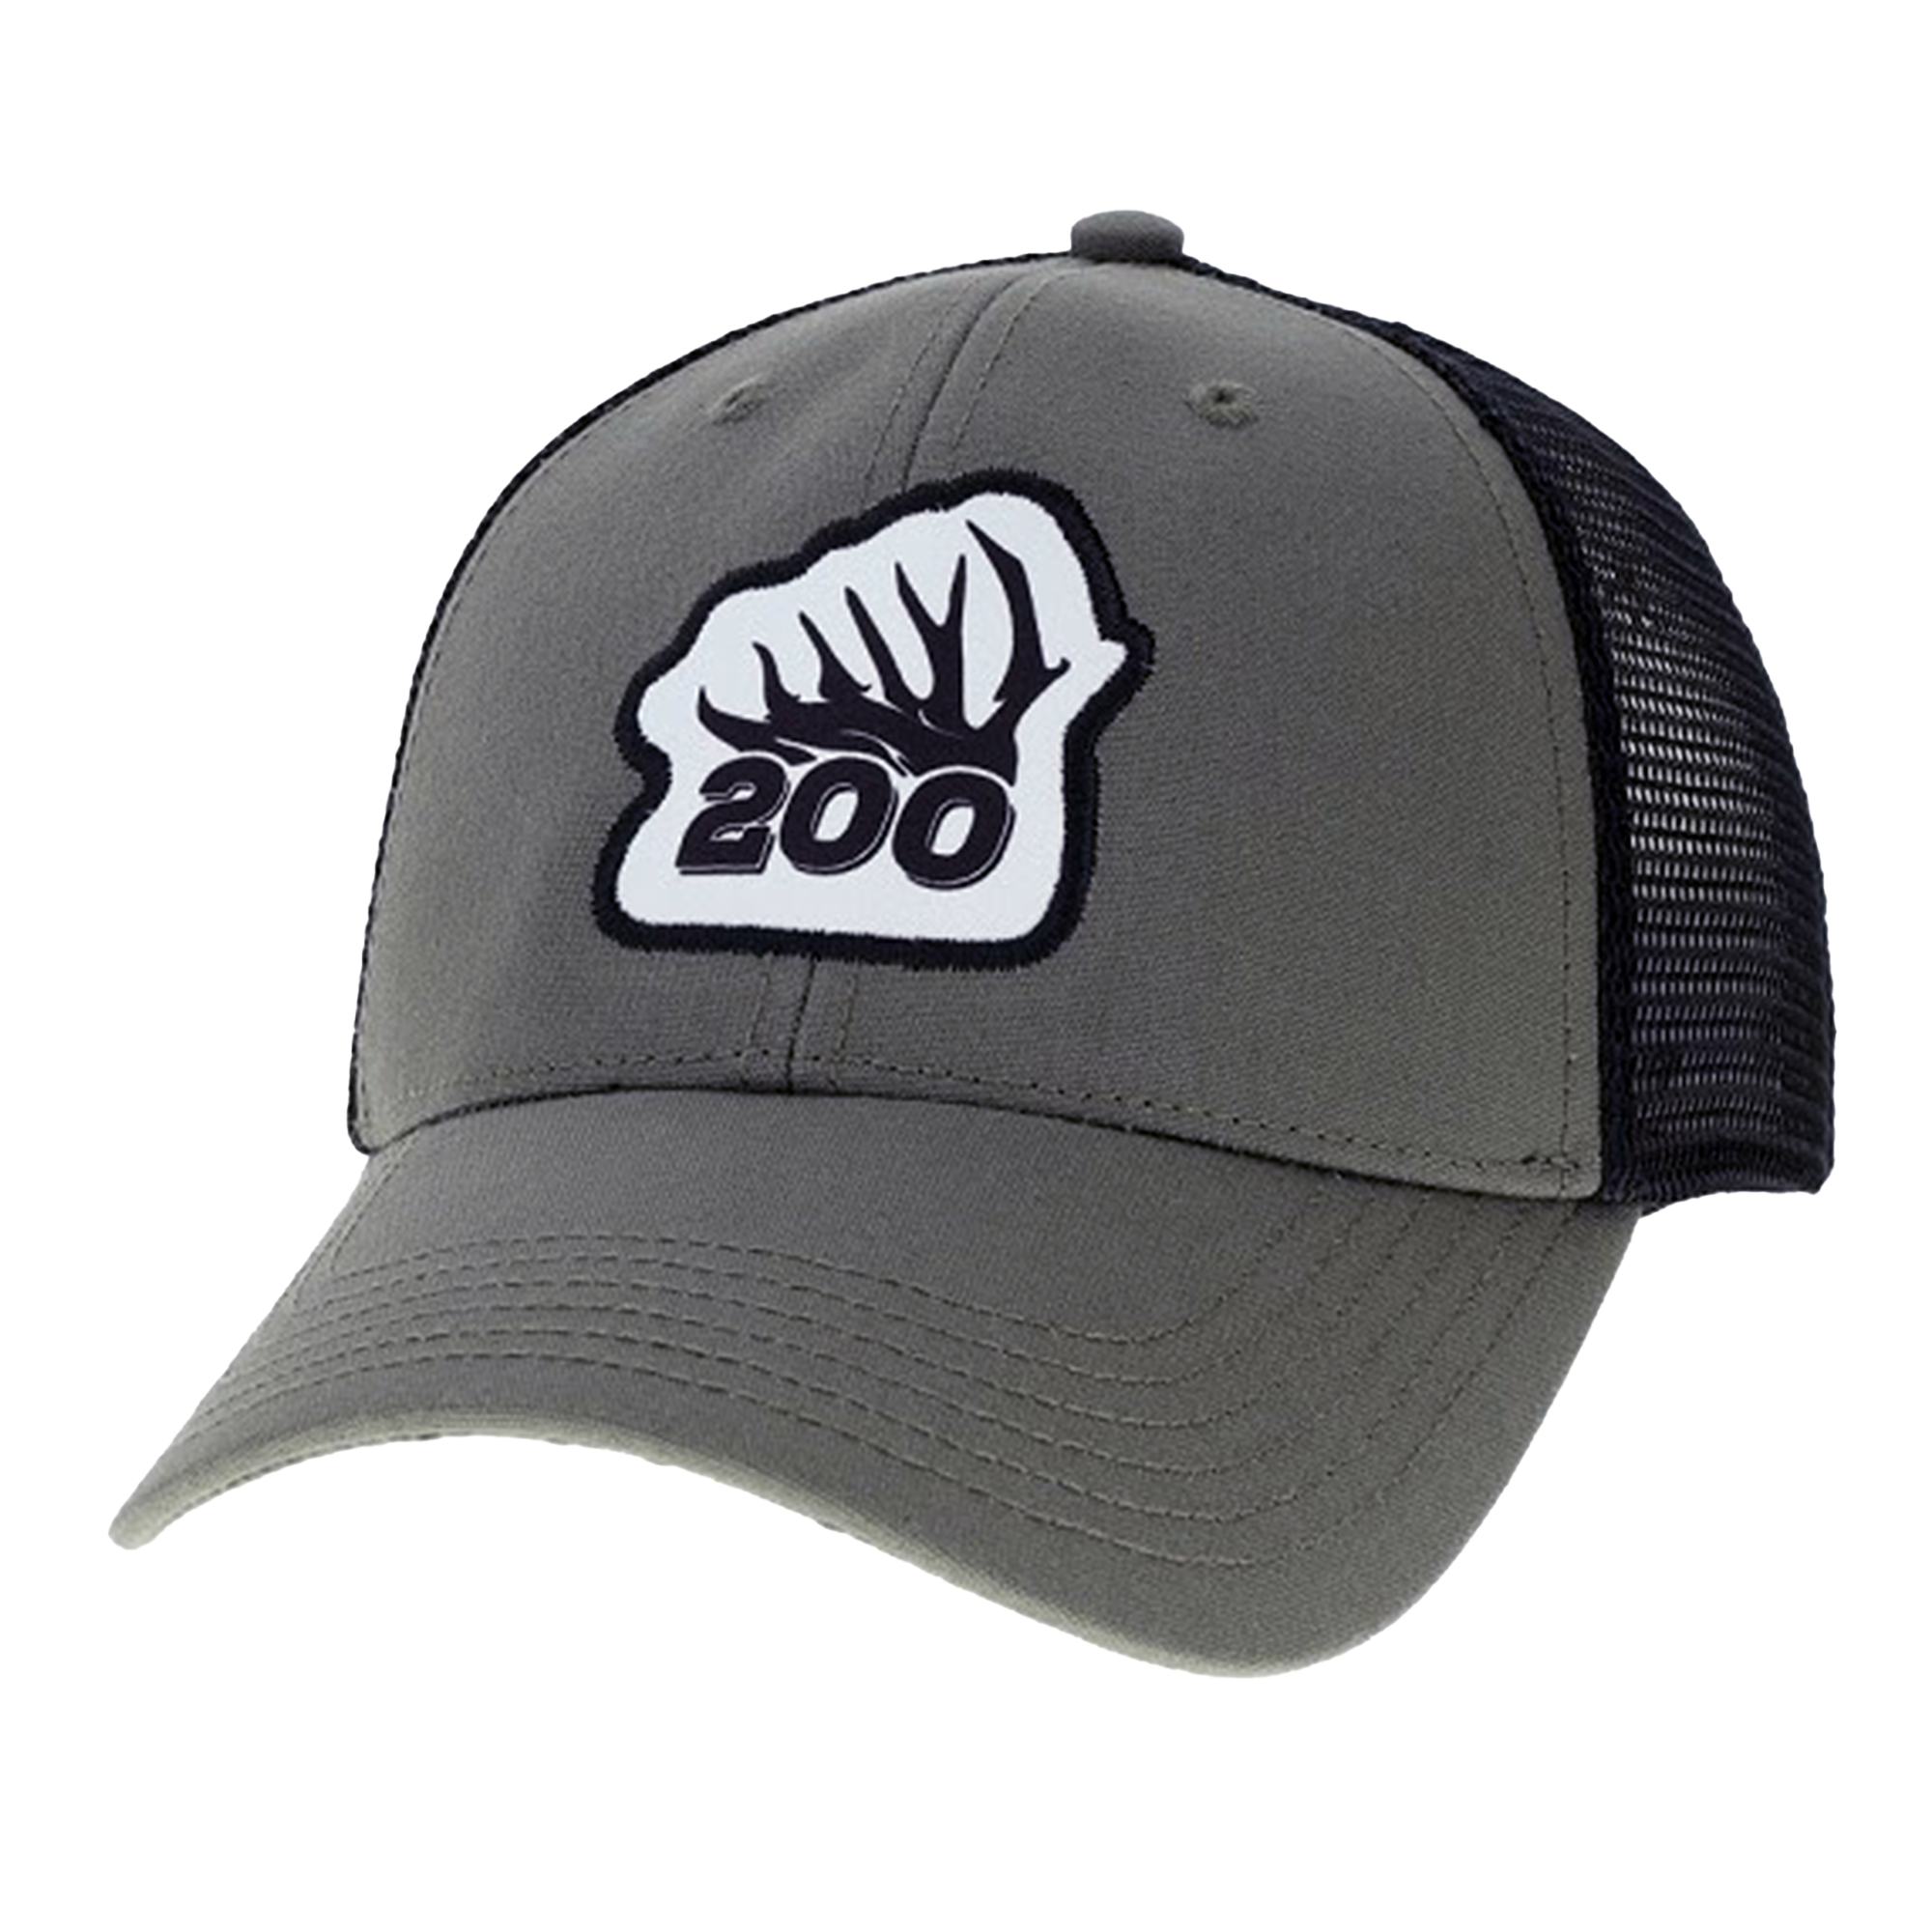 200 Gray/Black mesh - Silicone patch